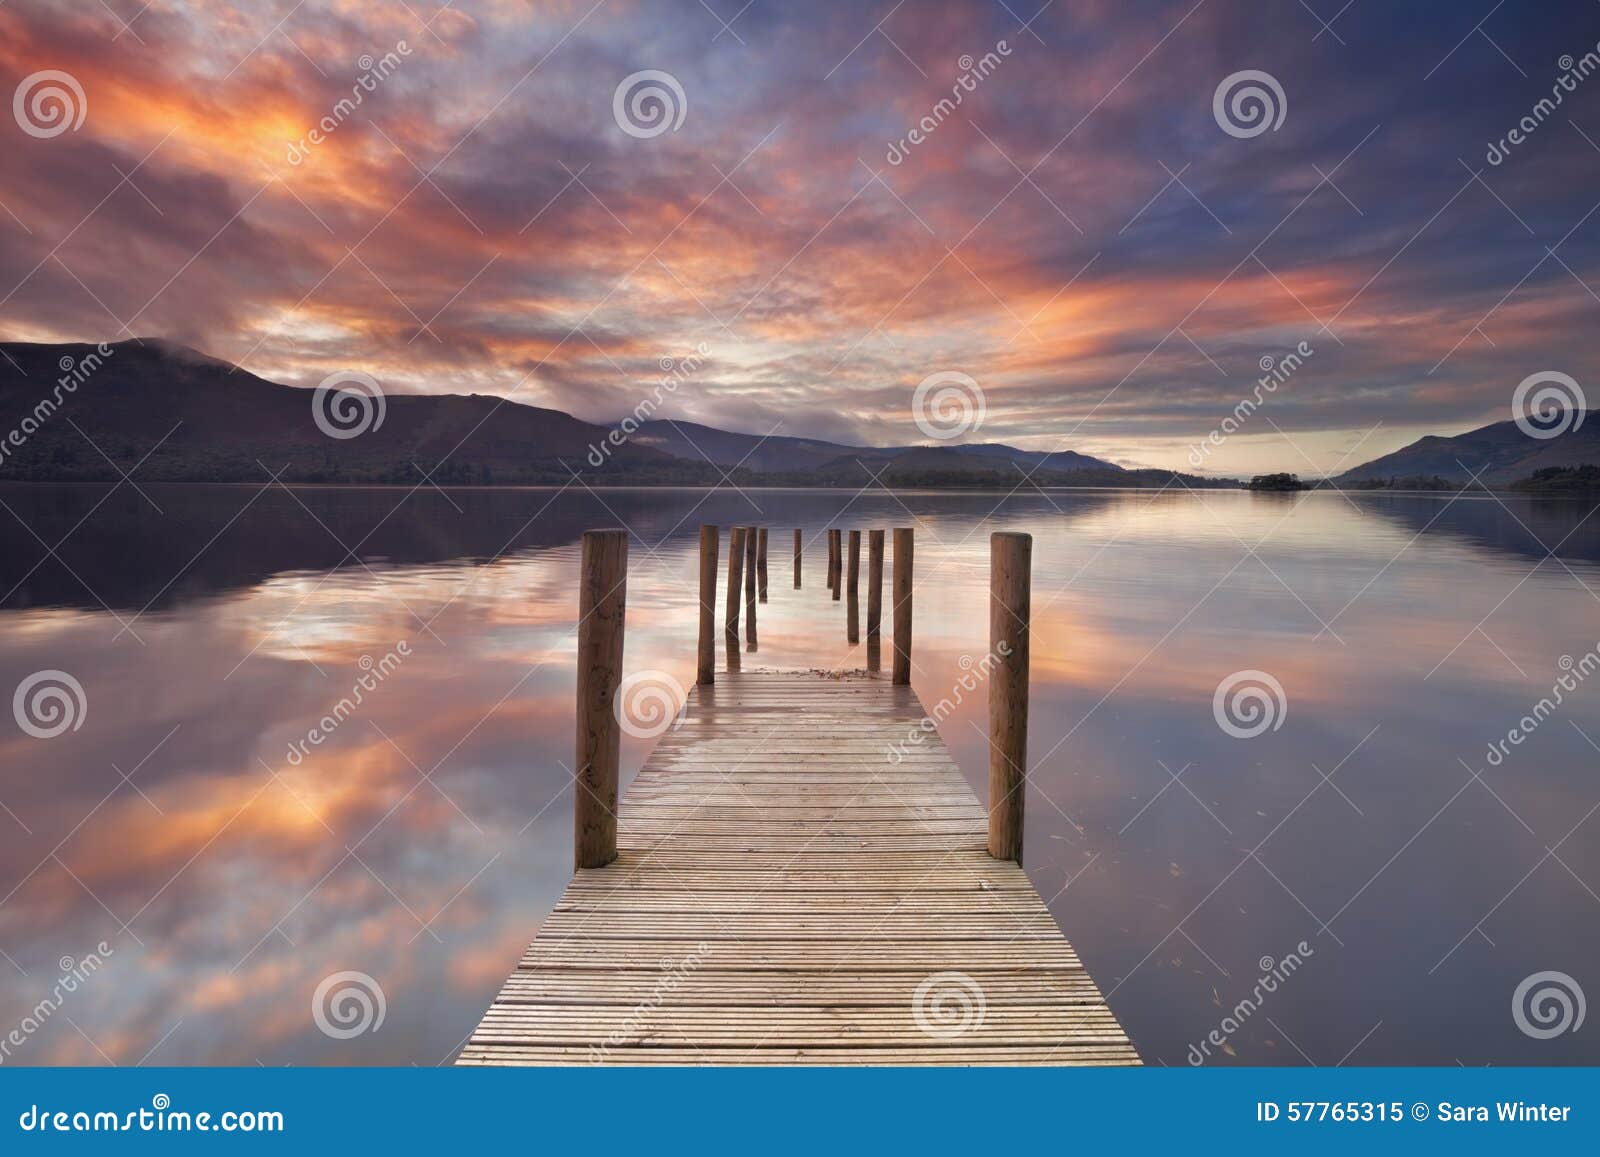 flooded jetty in derwent water, lake district, england at sunset